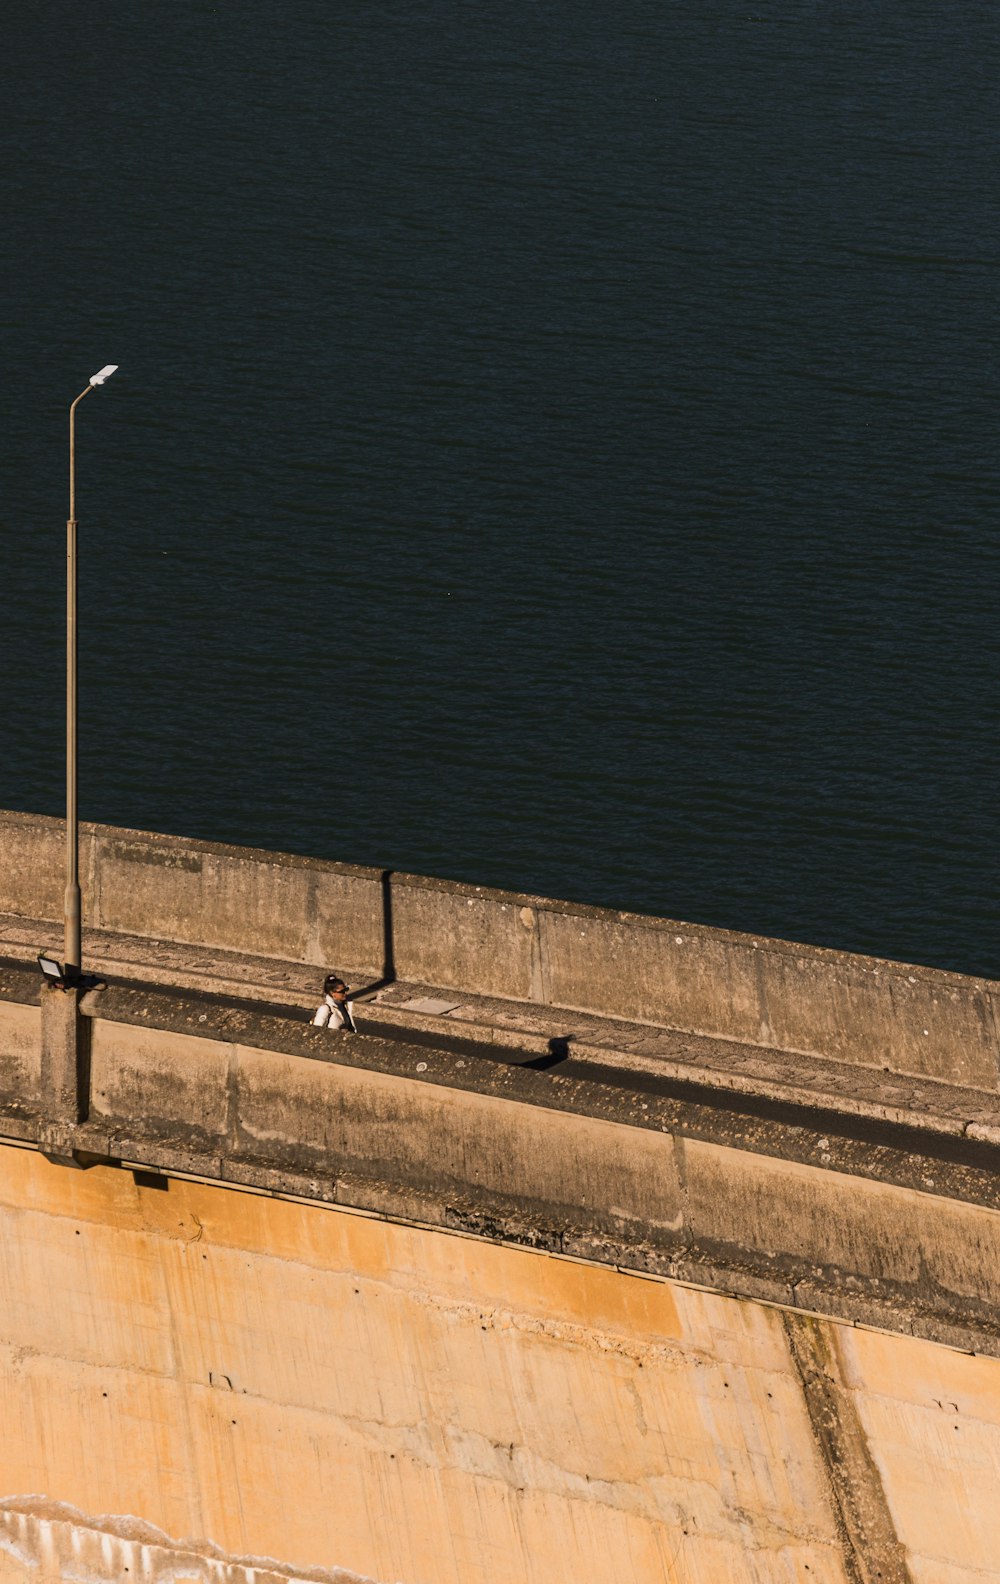 a couple of birds sitting on the side of a bridge